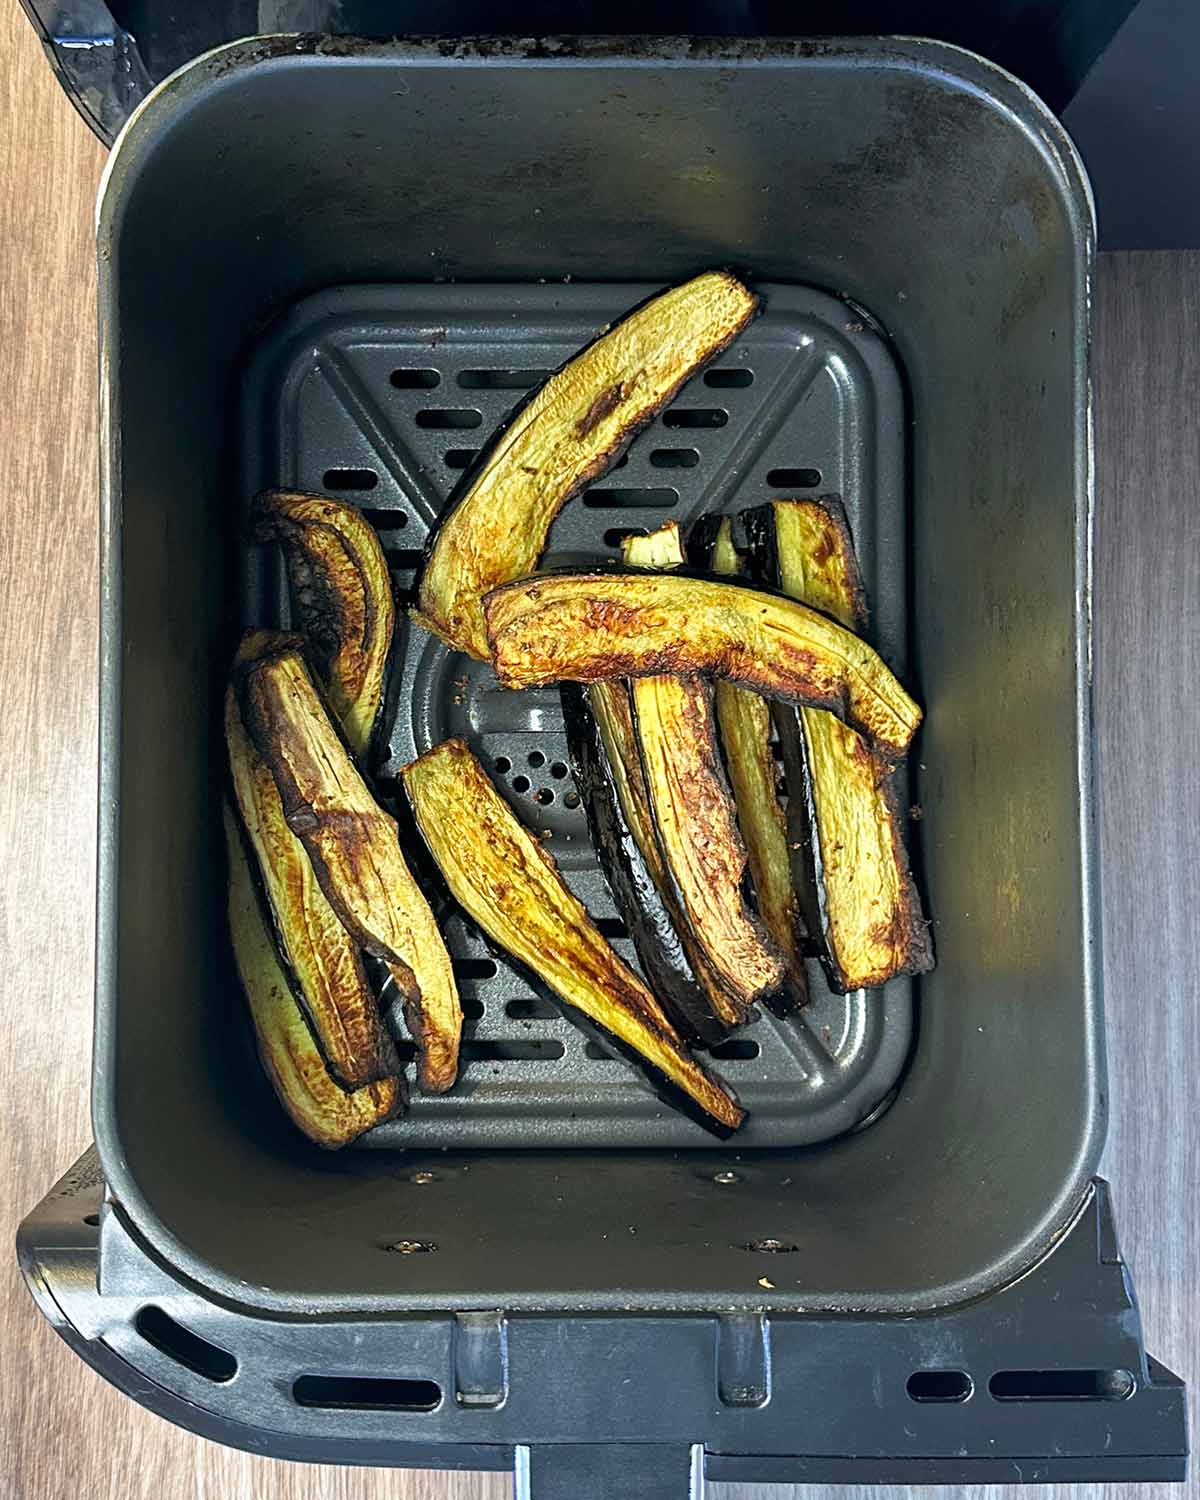 Cooked aubergine strips in an air fryer basket.